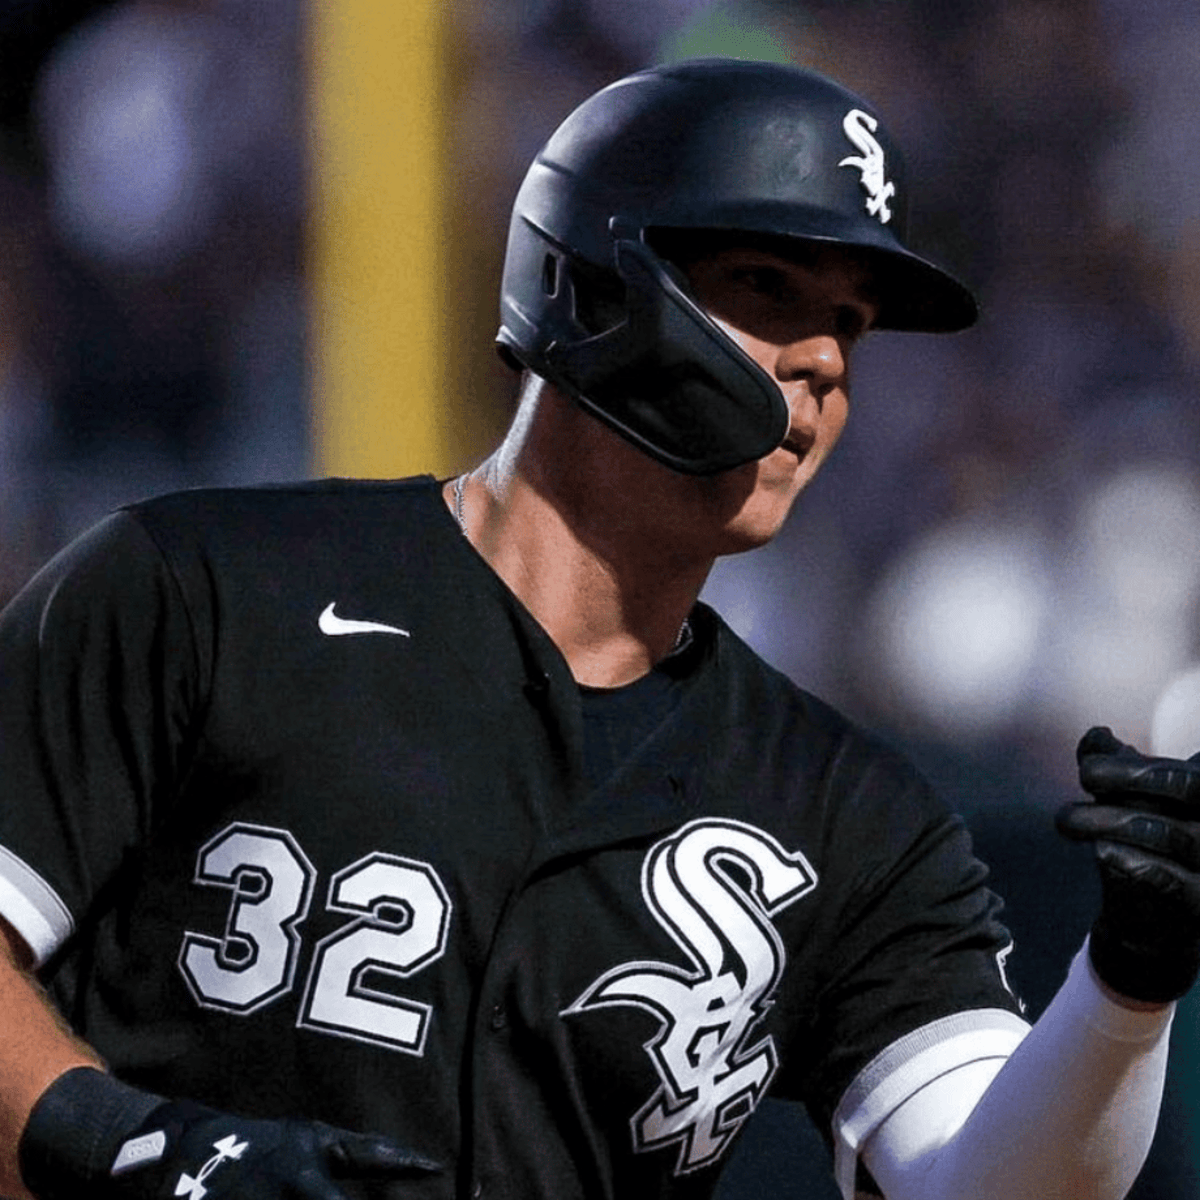 Gavin Sheets Lifts White Sox Late in 3-2 Walk-Off Win Over A's